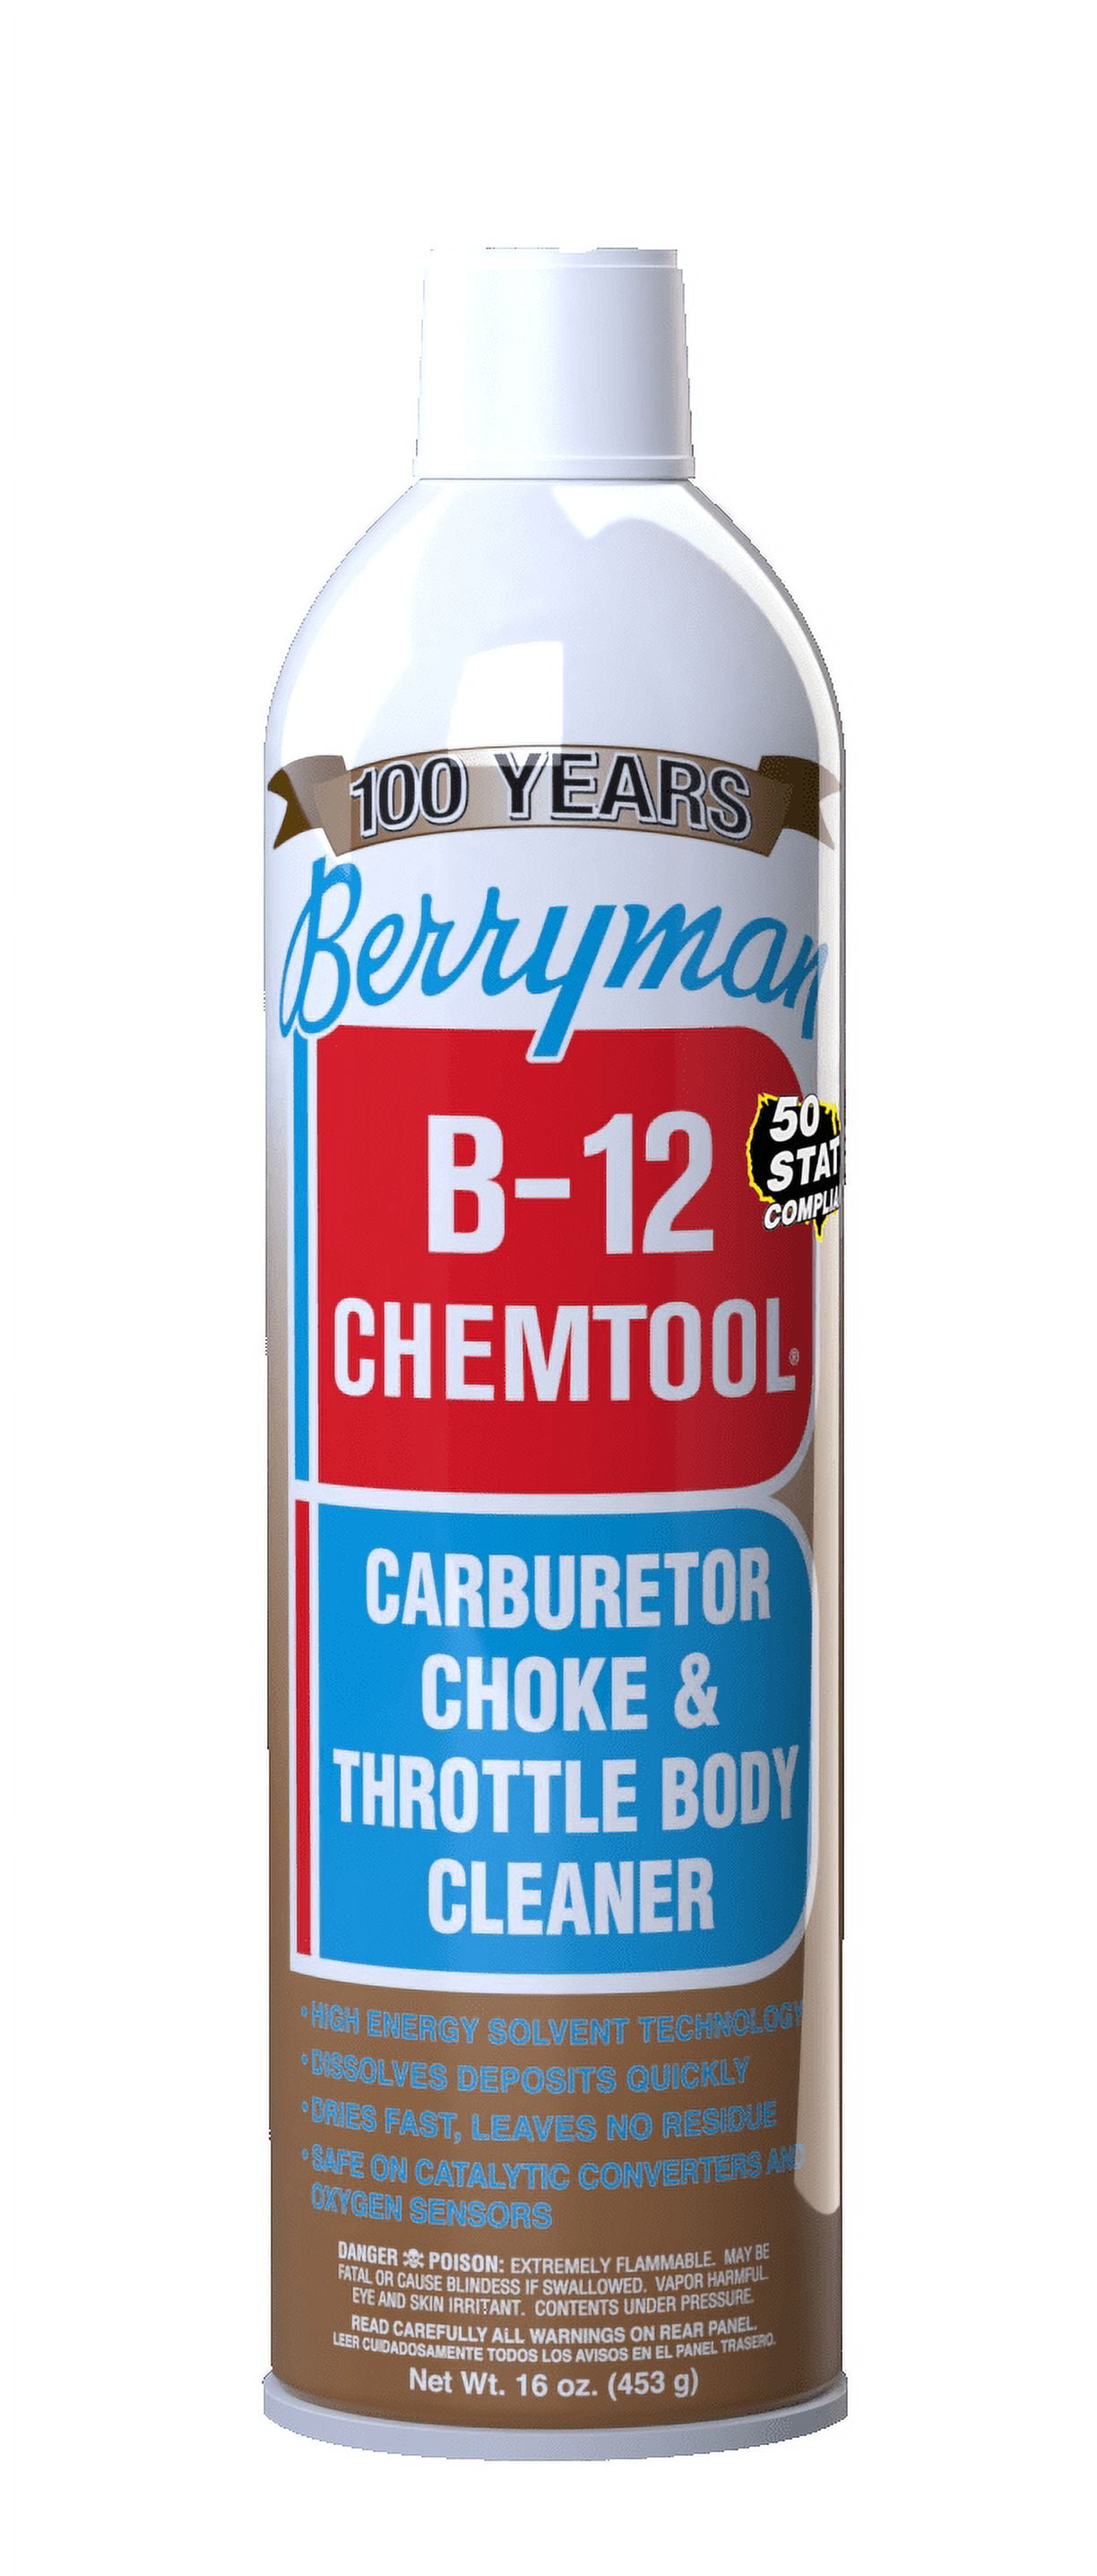 Berryman B-12 Chemtool Fuel Injector Cleaner - Shop Motor Oil